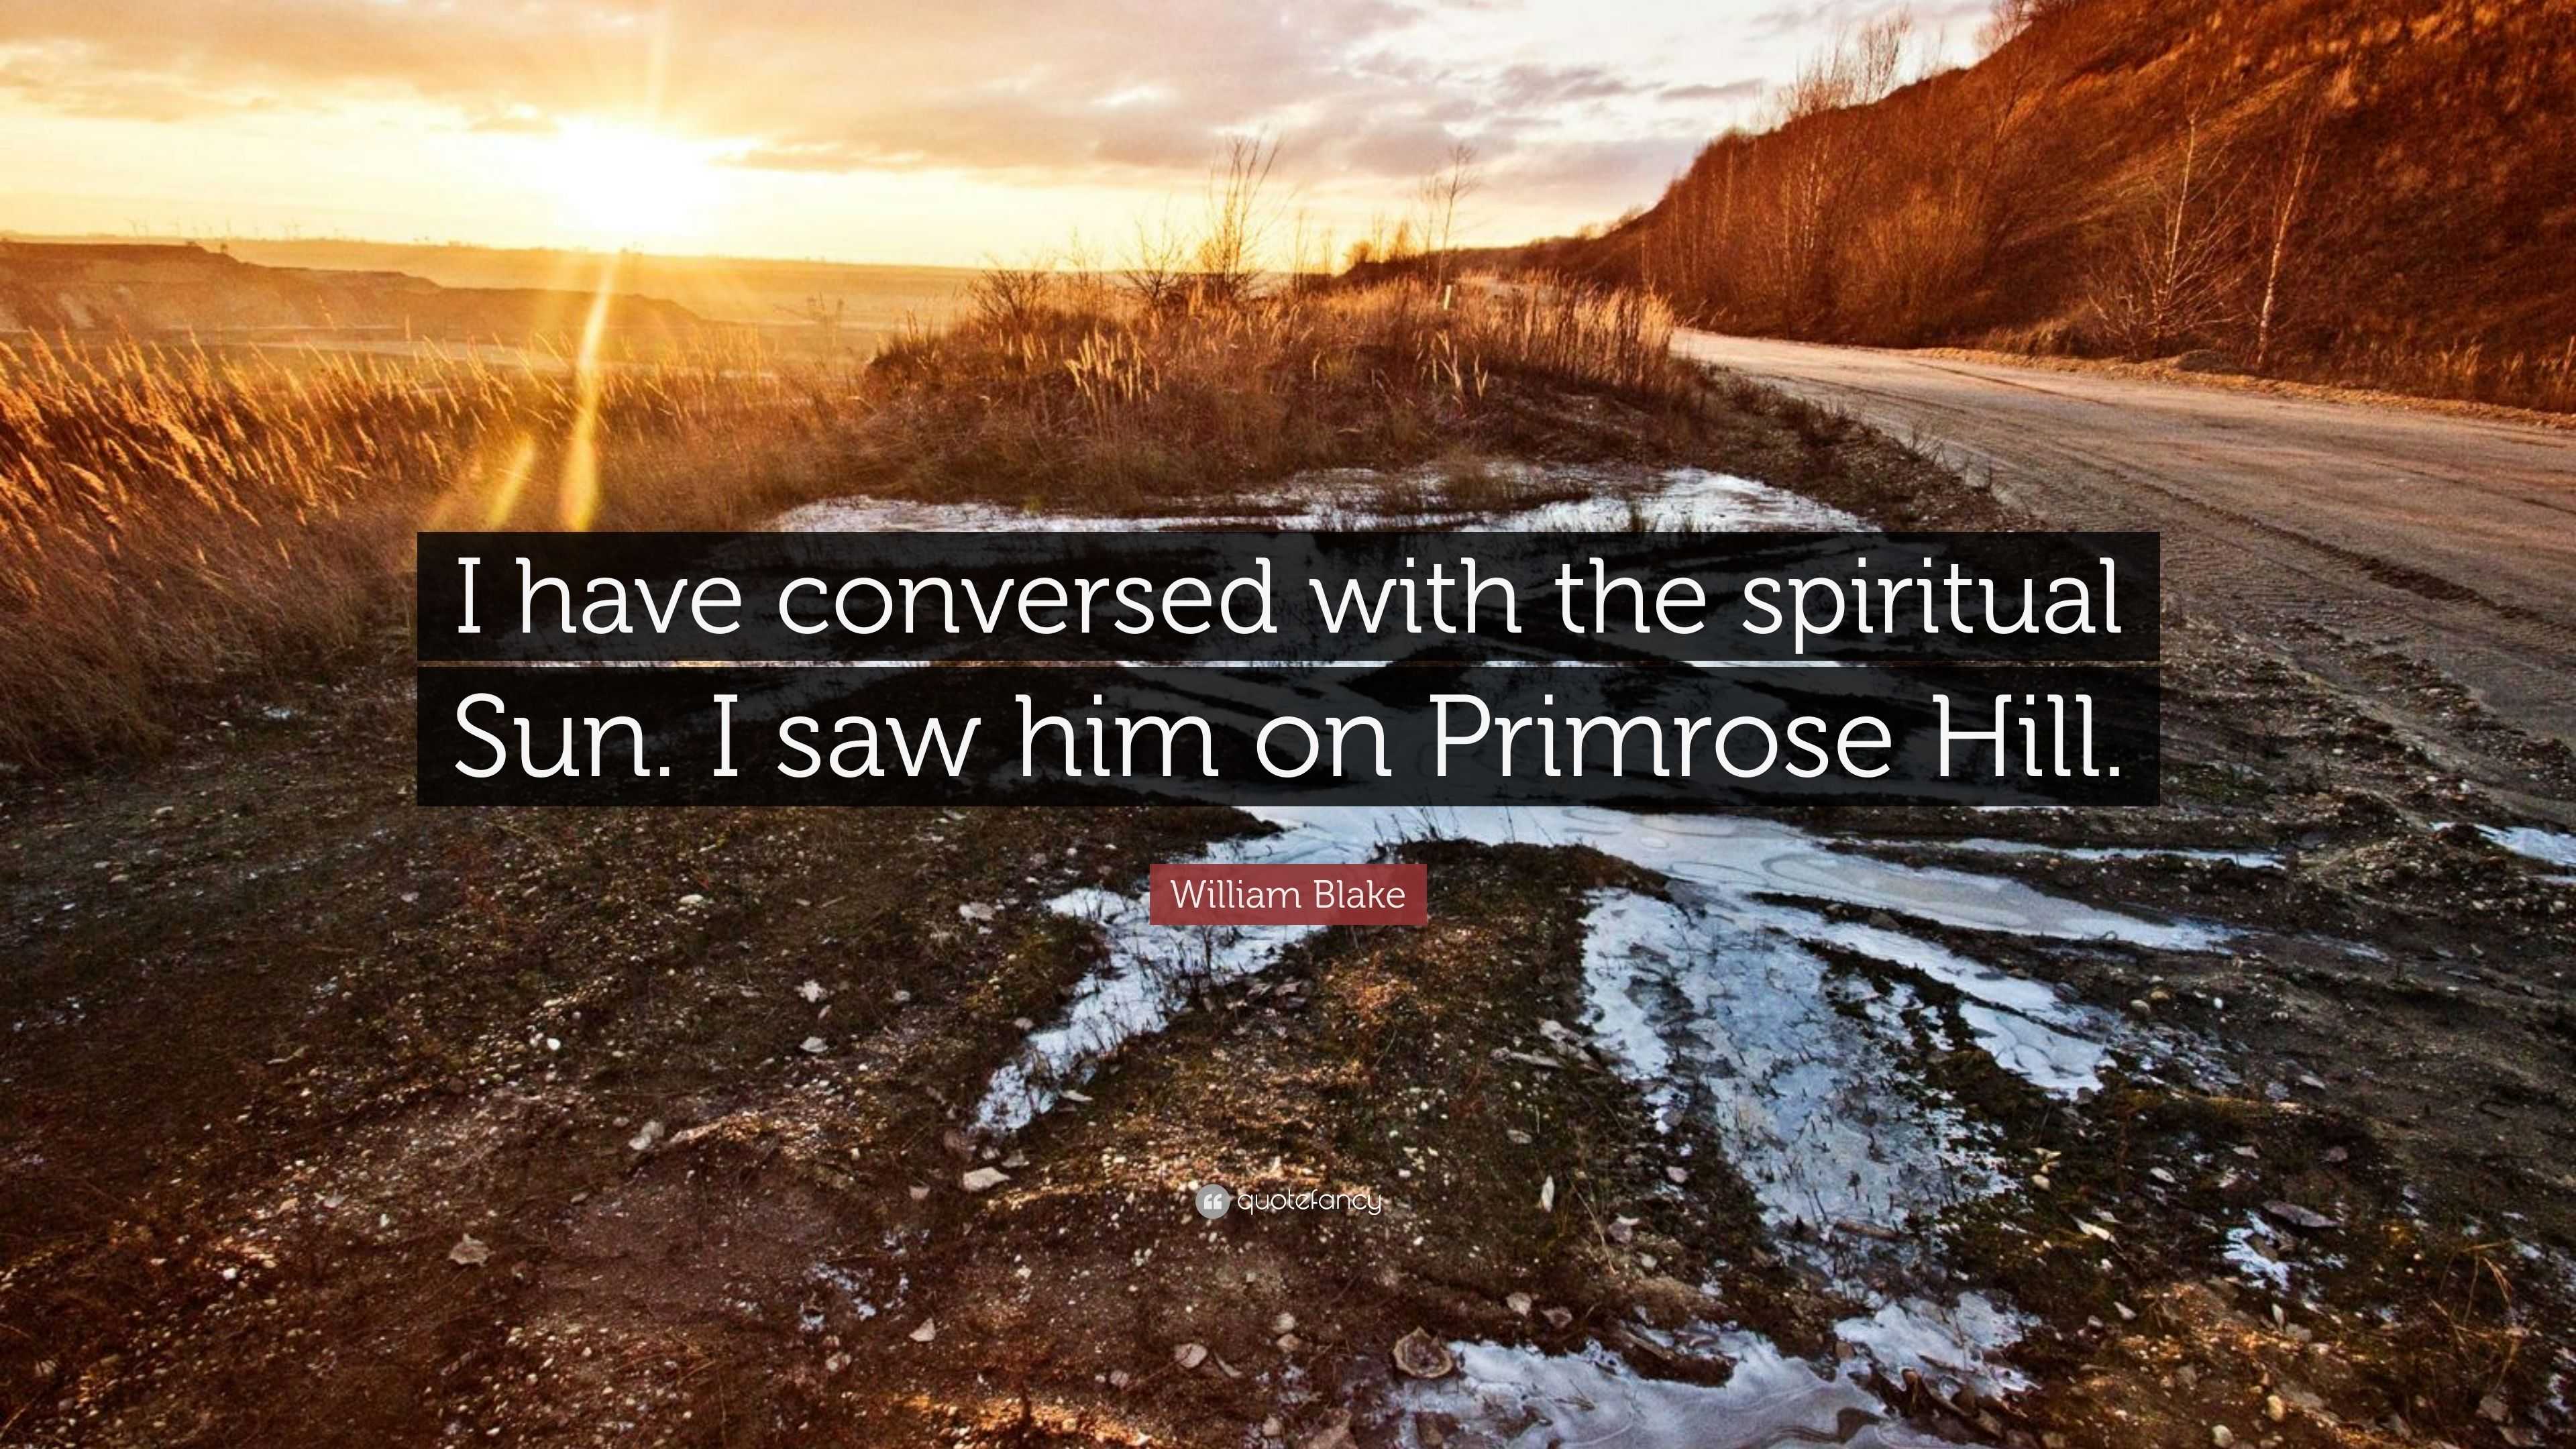 William Blake Quote: “I have conversed with the spiritual Sun. I saw him on  Primrose Hill.” (10 wallpapers) - Quotefancy